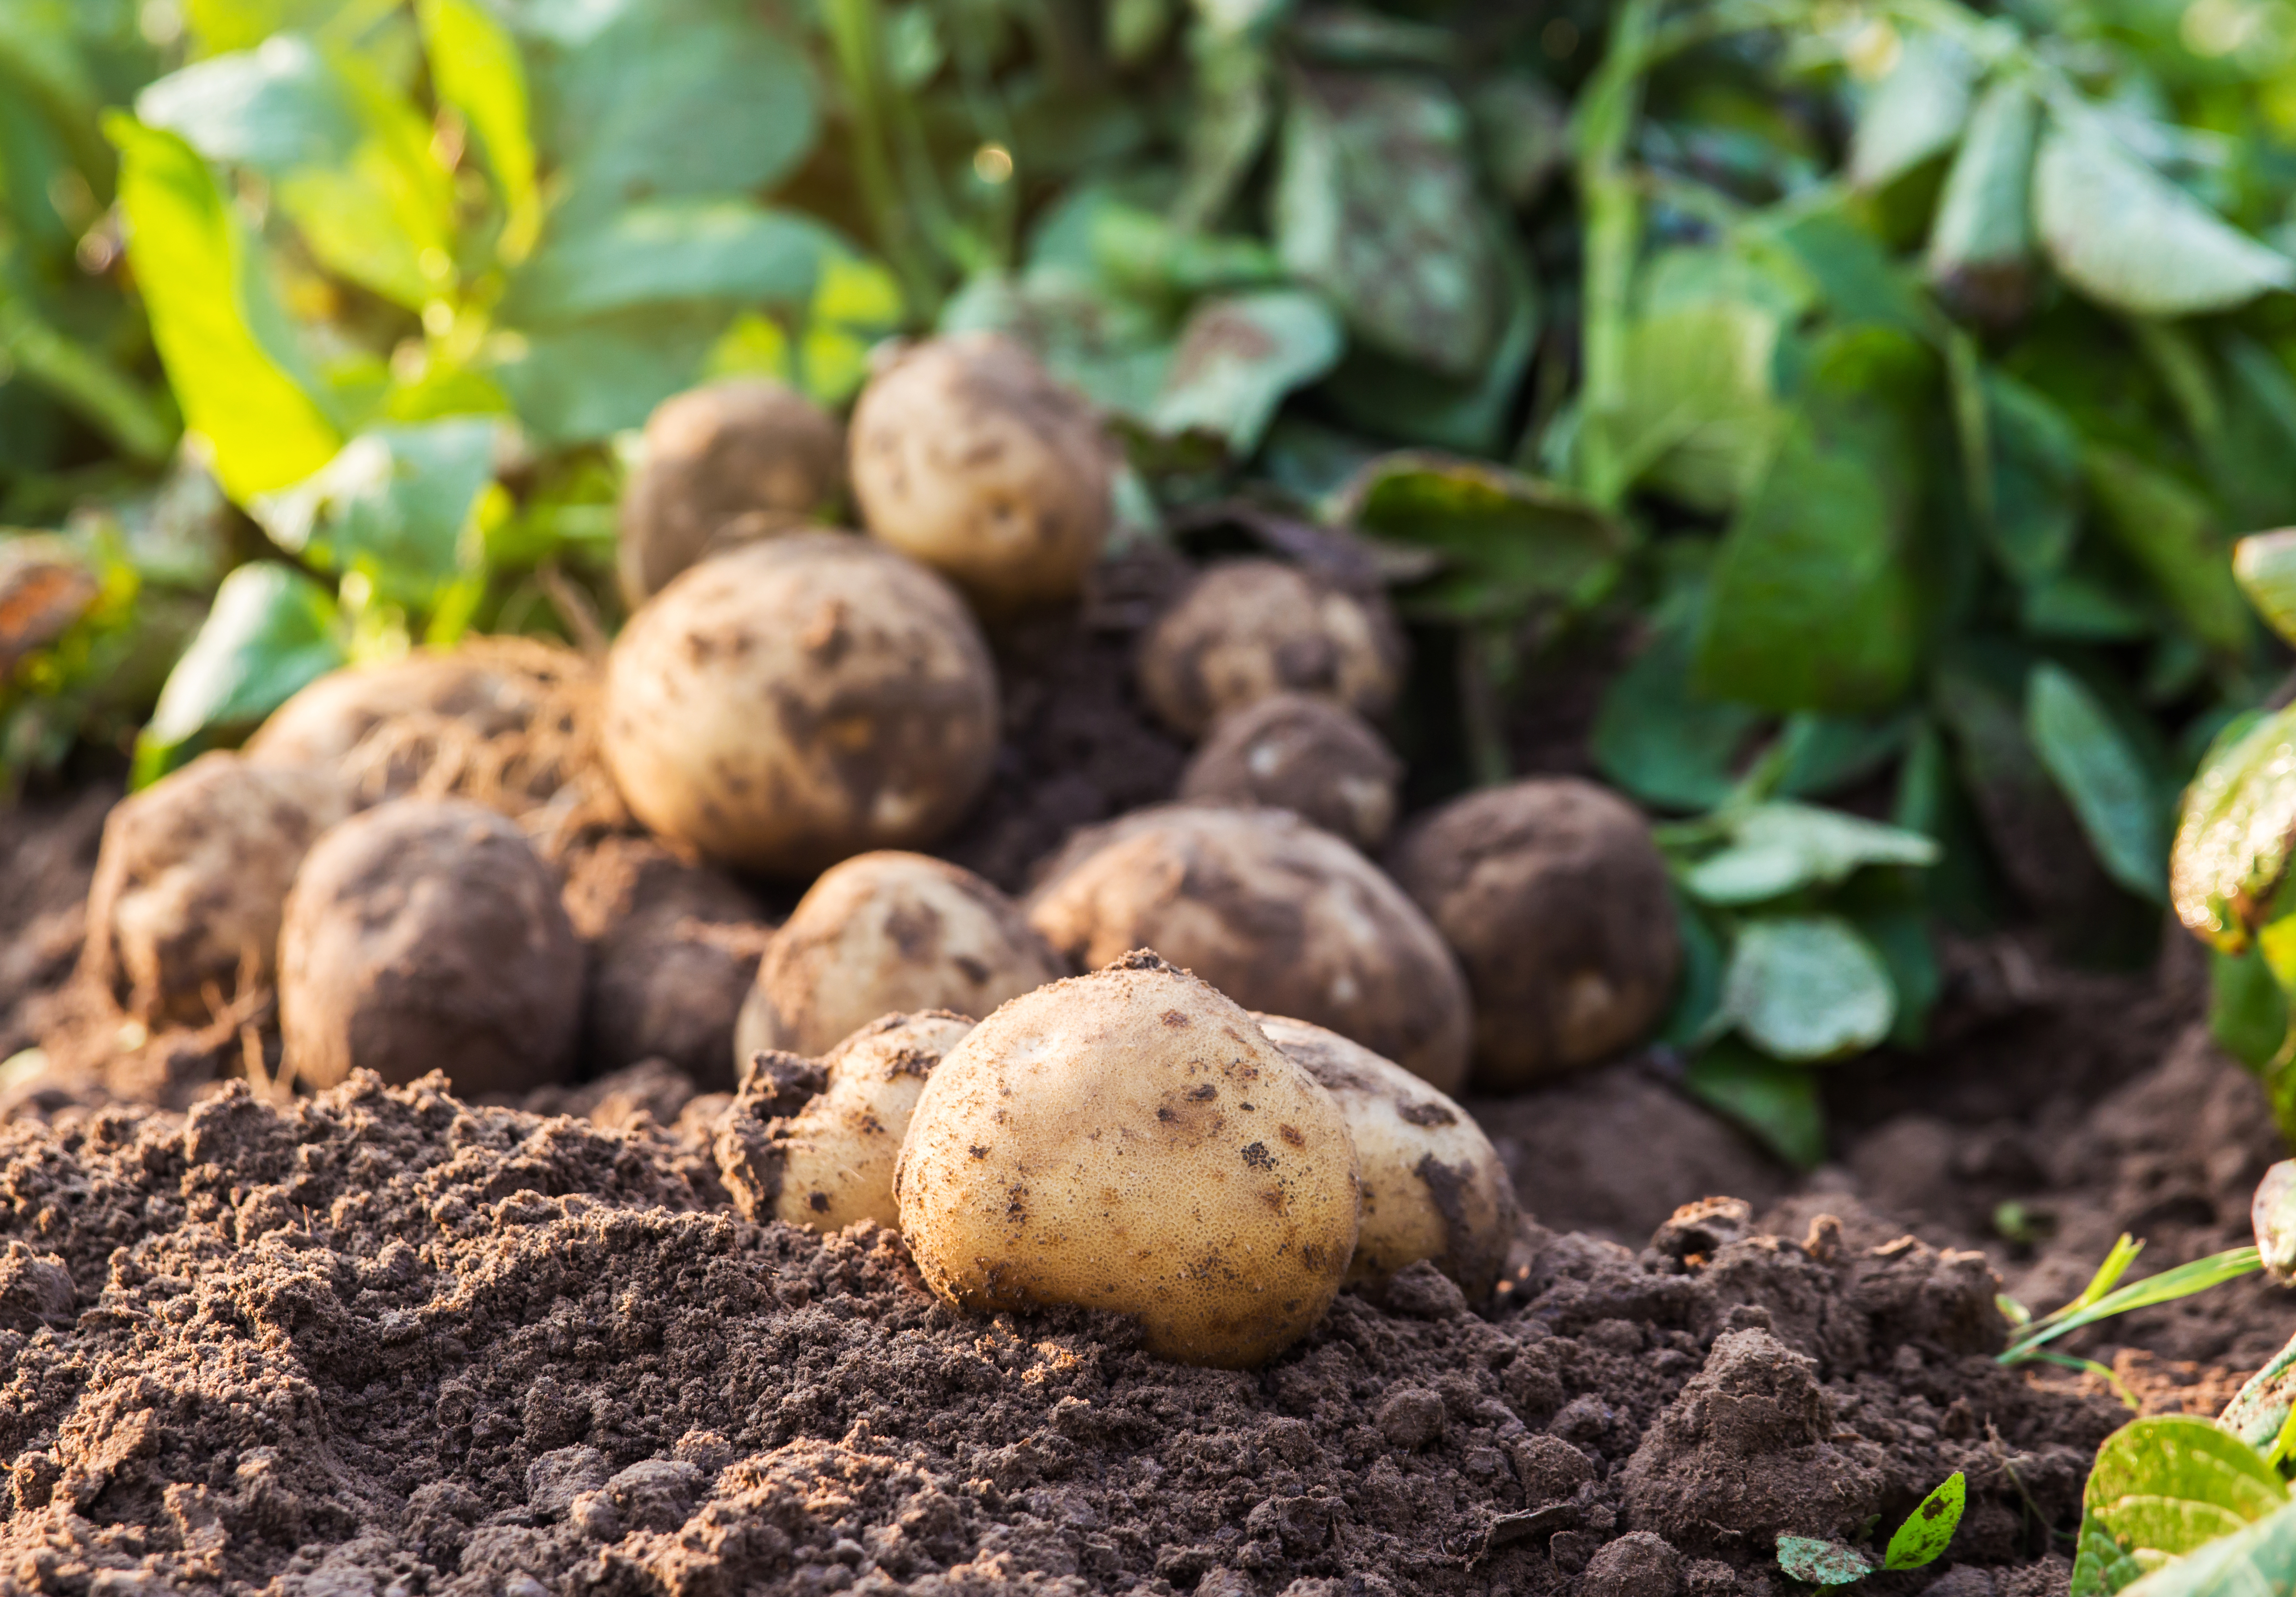 Potatoes sitting on soil with potato plants in the background